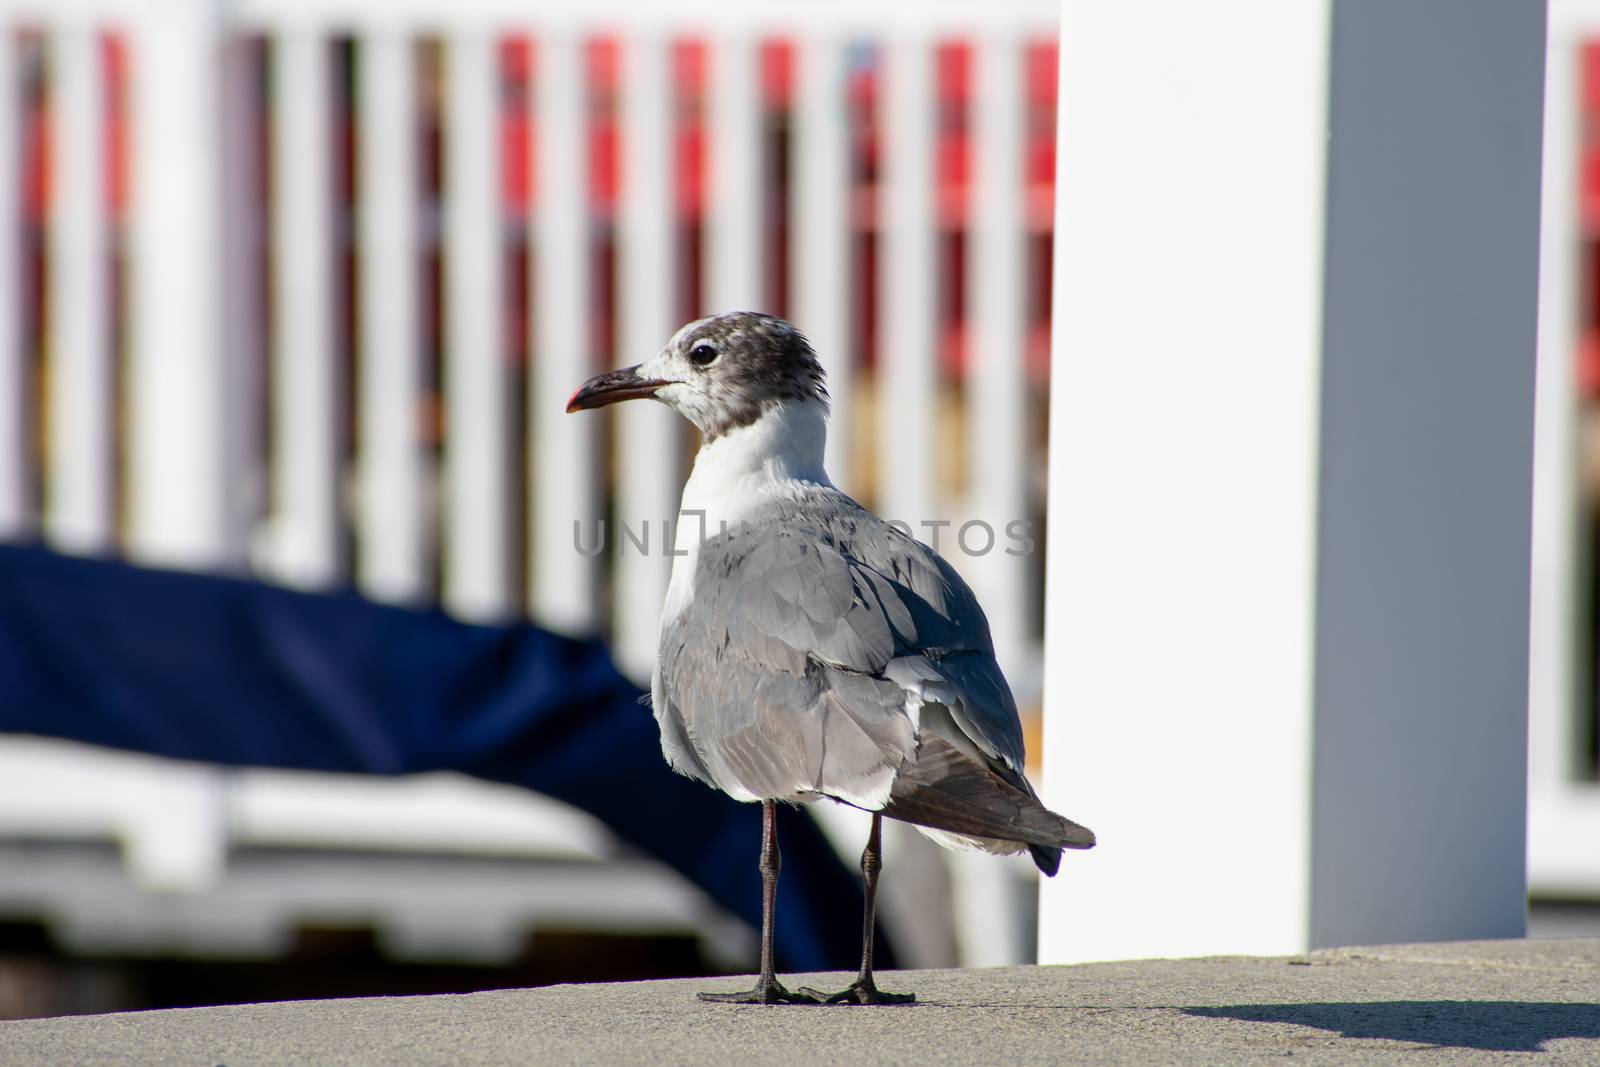 A Seagull Standing on a Concrete Ledge Looking Back at the Camera